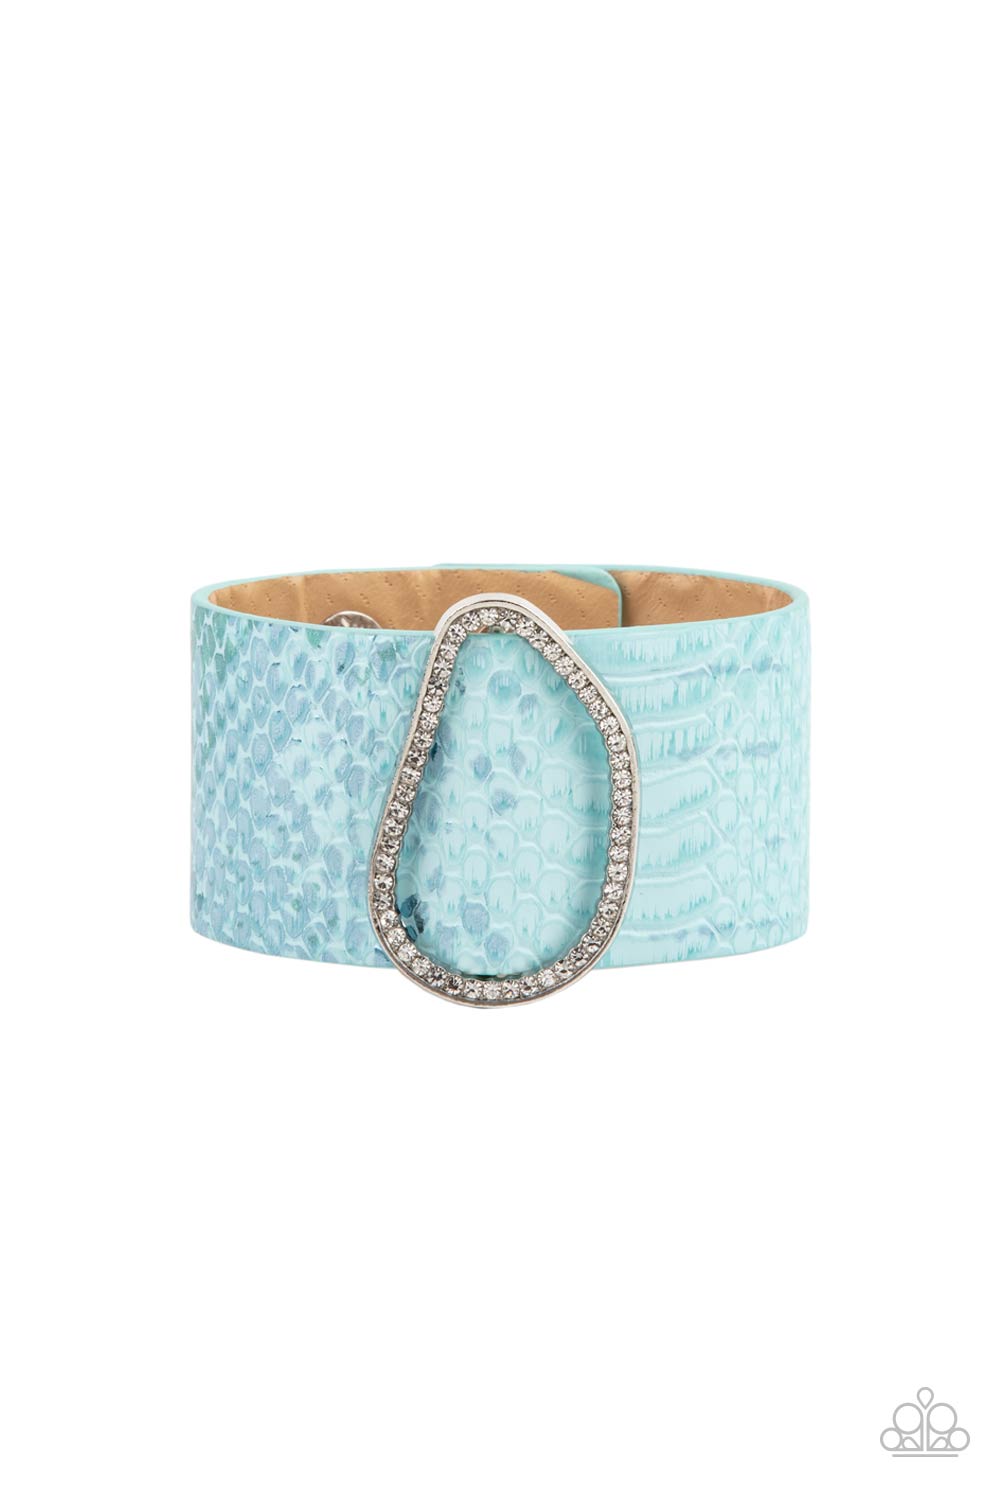 HISS-tory In The Making - Blue Paparazzi Wrap Bracelet